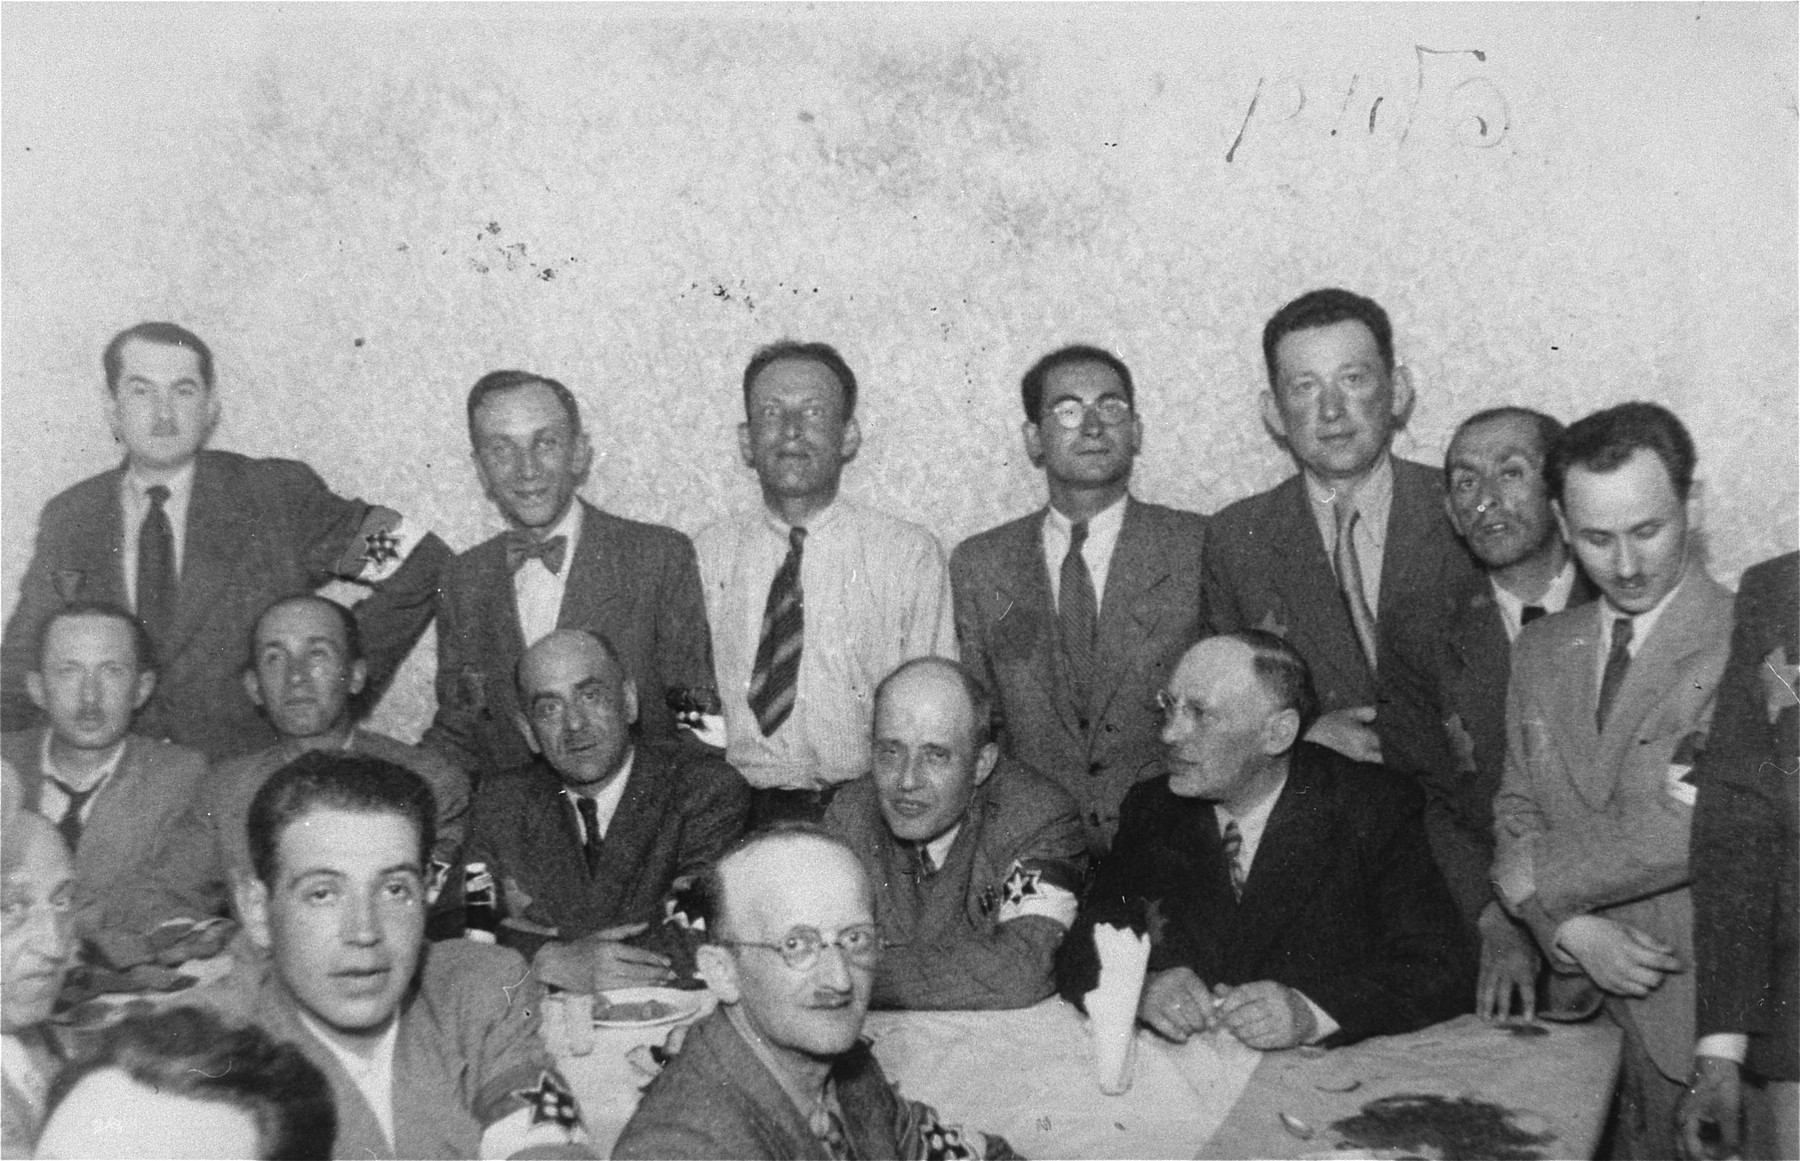 Members of the Lodz ghetto administration, including heads of workshops, police and members of the Sonderkommando, at a social gathering.

Among those pictured are: Leon Fajtlowicz, in charge of the leather workshops (standing fourth from the left), Zygmunt Reingold, director of food supply (standing fifth from the left), Baruch Praszker, chief of special assignments (standing second from the right),  Leon Rozenblatt, chief of the ghettto police (seated on the far side of the table, third from left) and David Warszawski, director of the tailoring workshops (seated on the far side of the table, first from right).